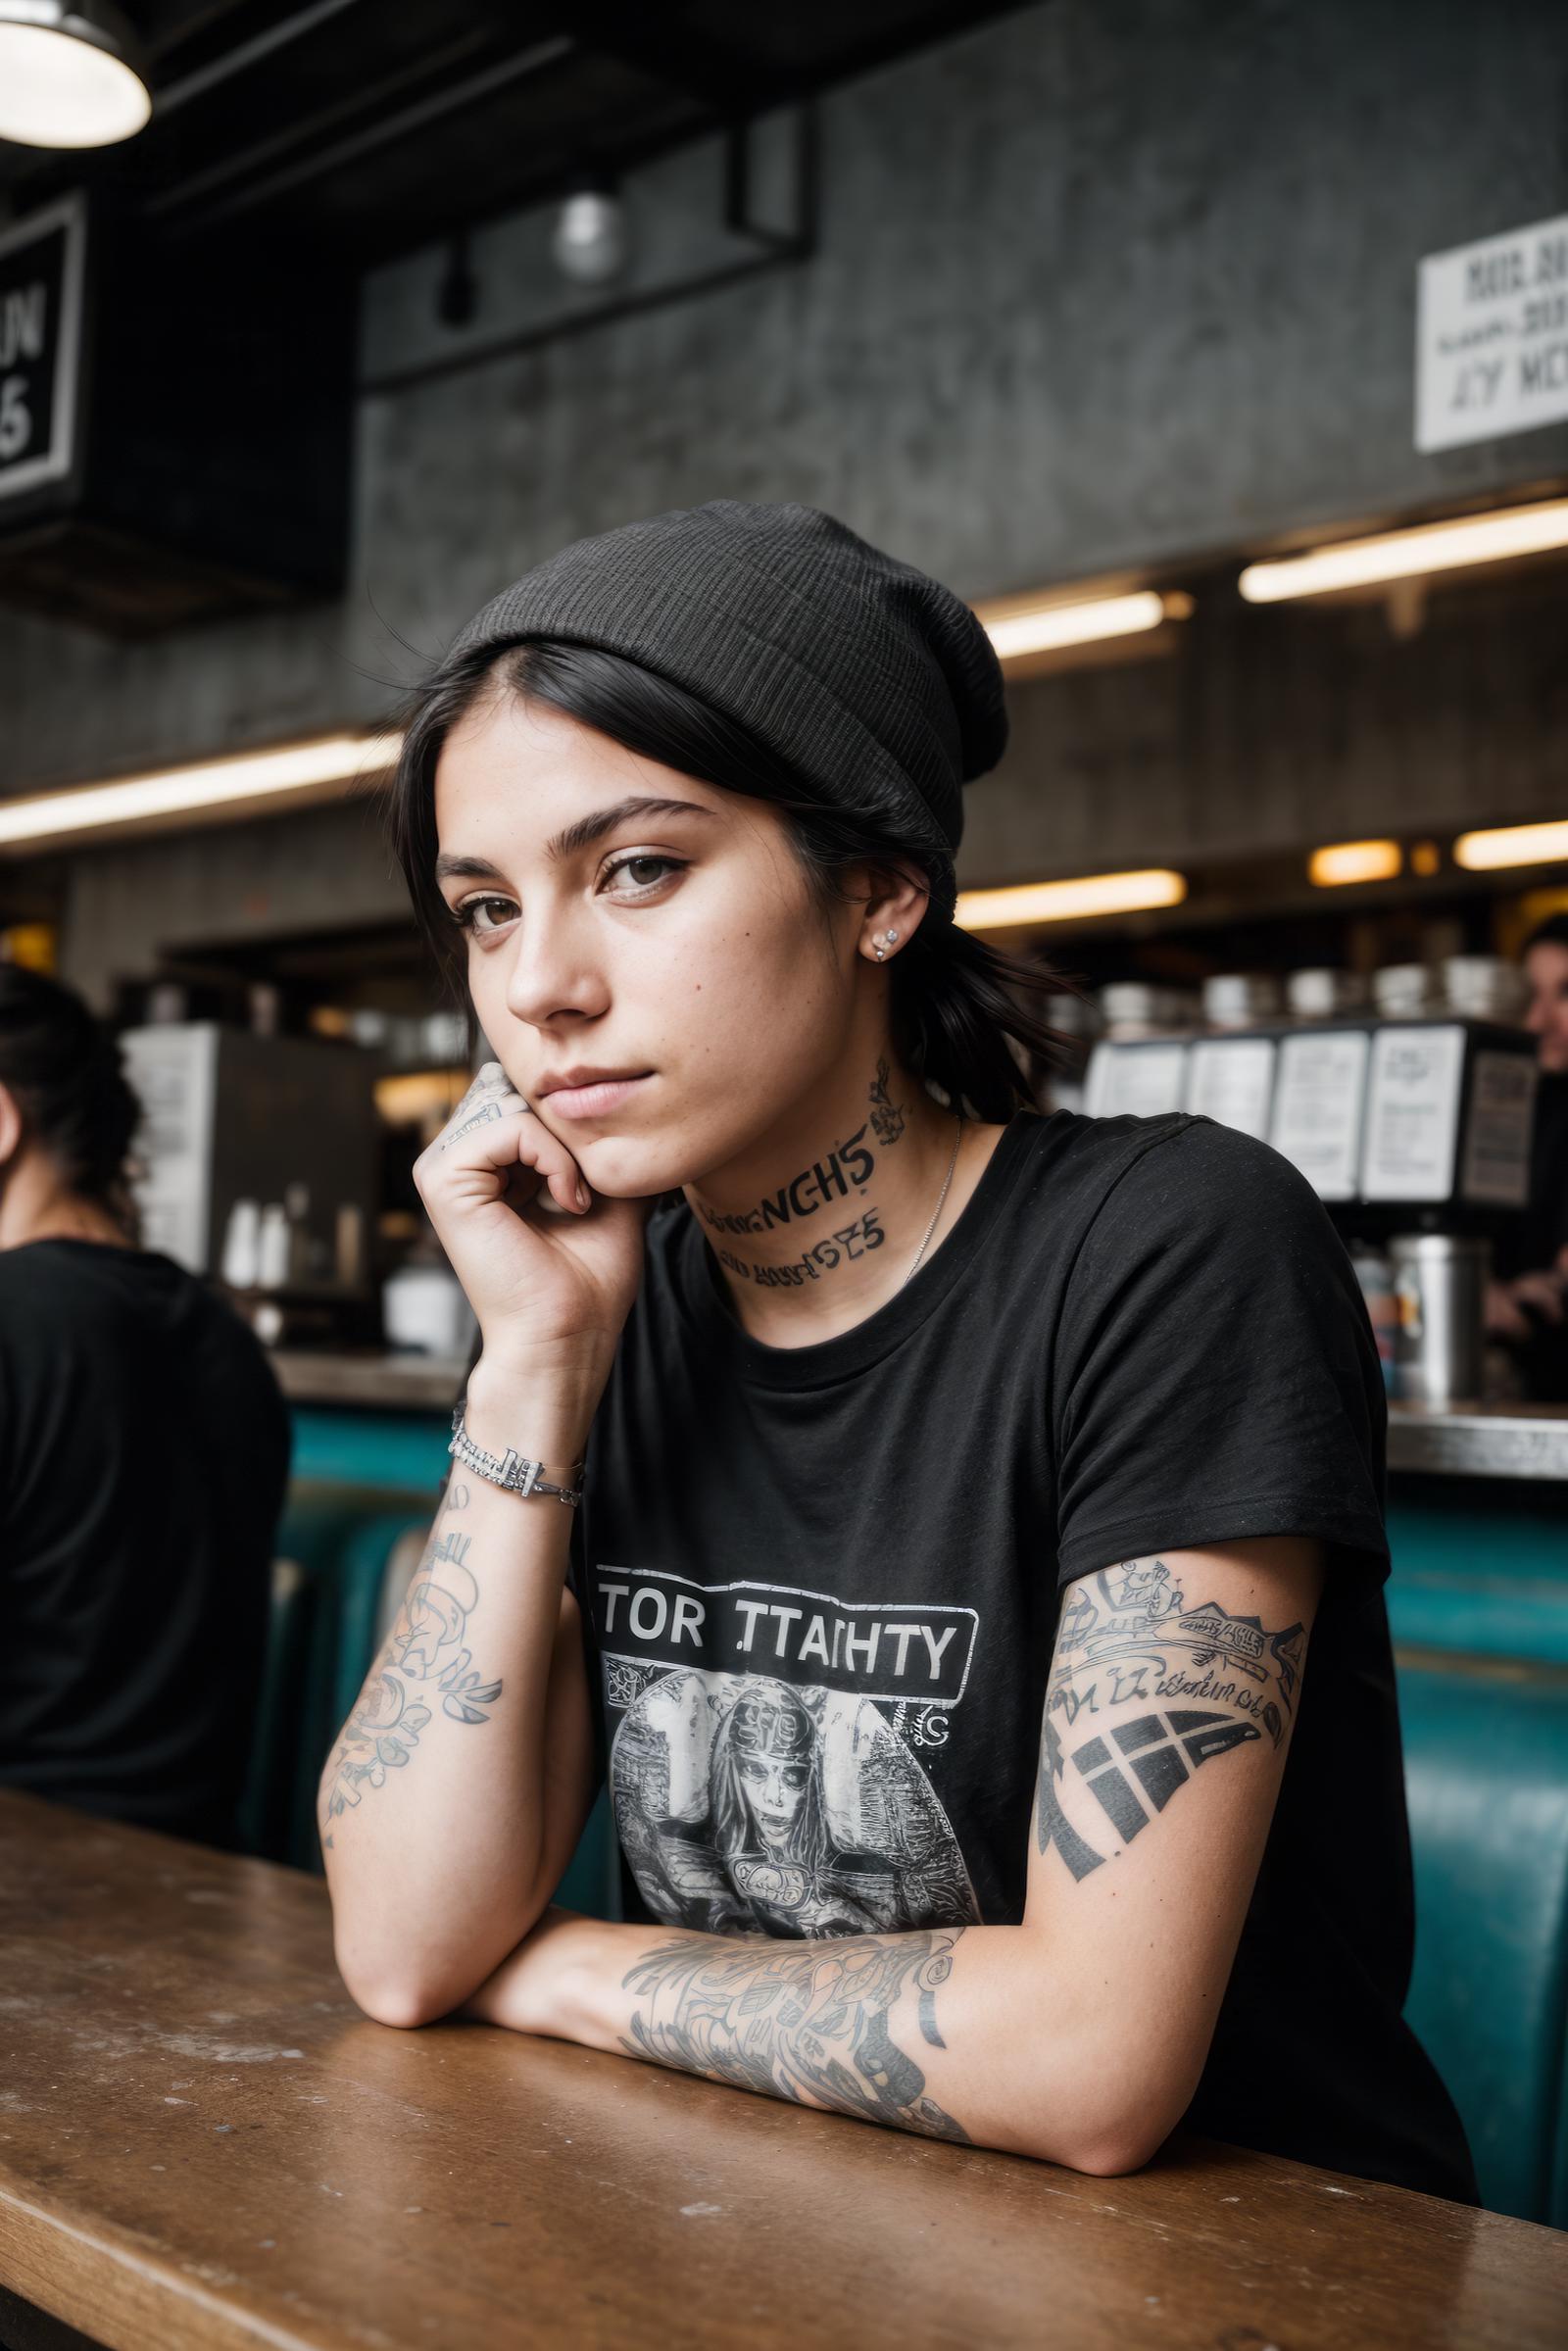 A young woman with tattoos and piercings sits at a booth in a restaurant.